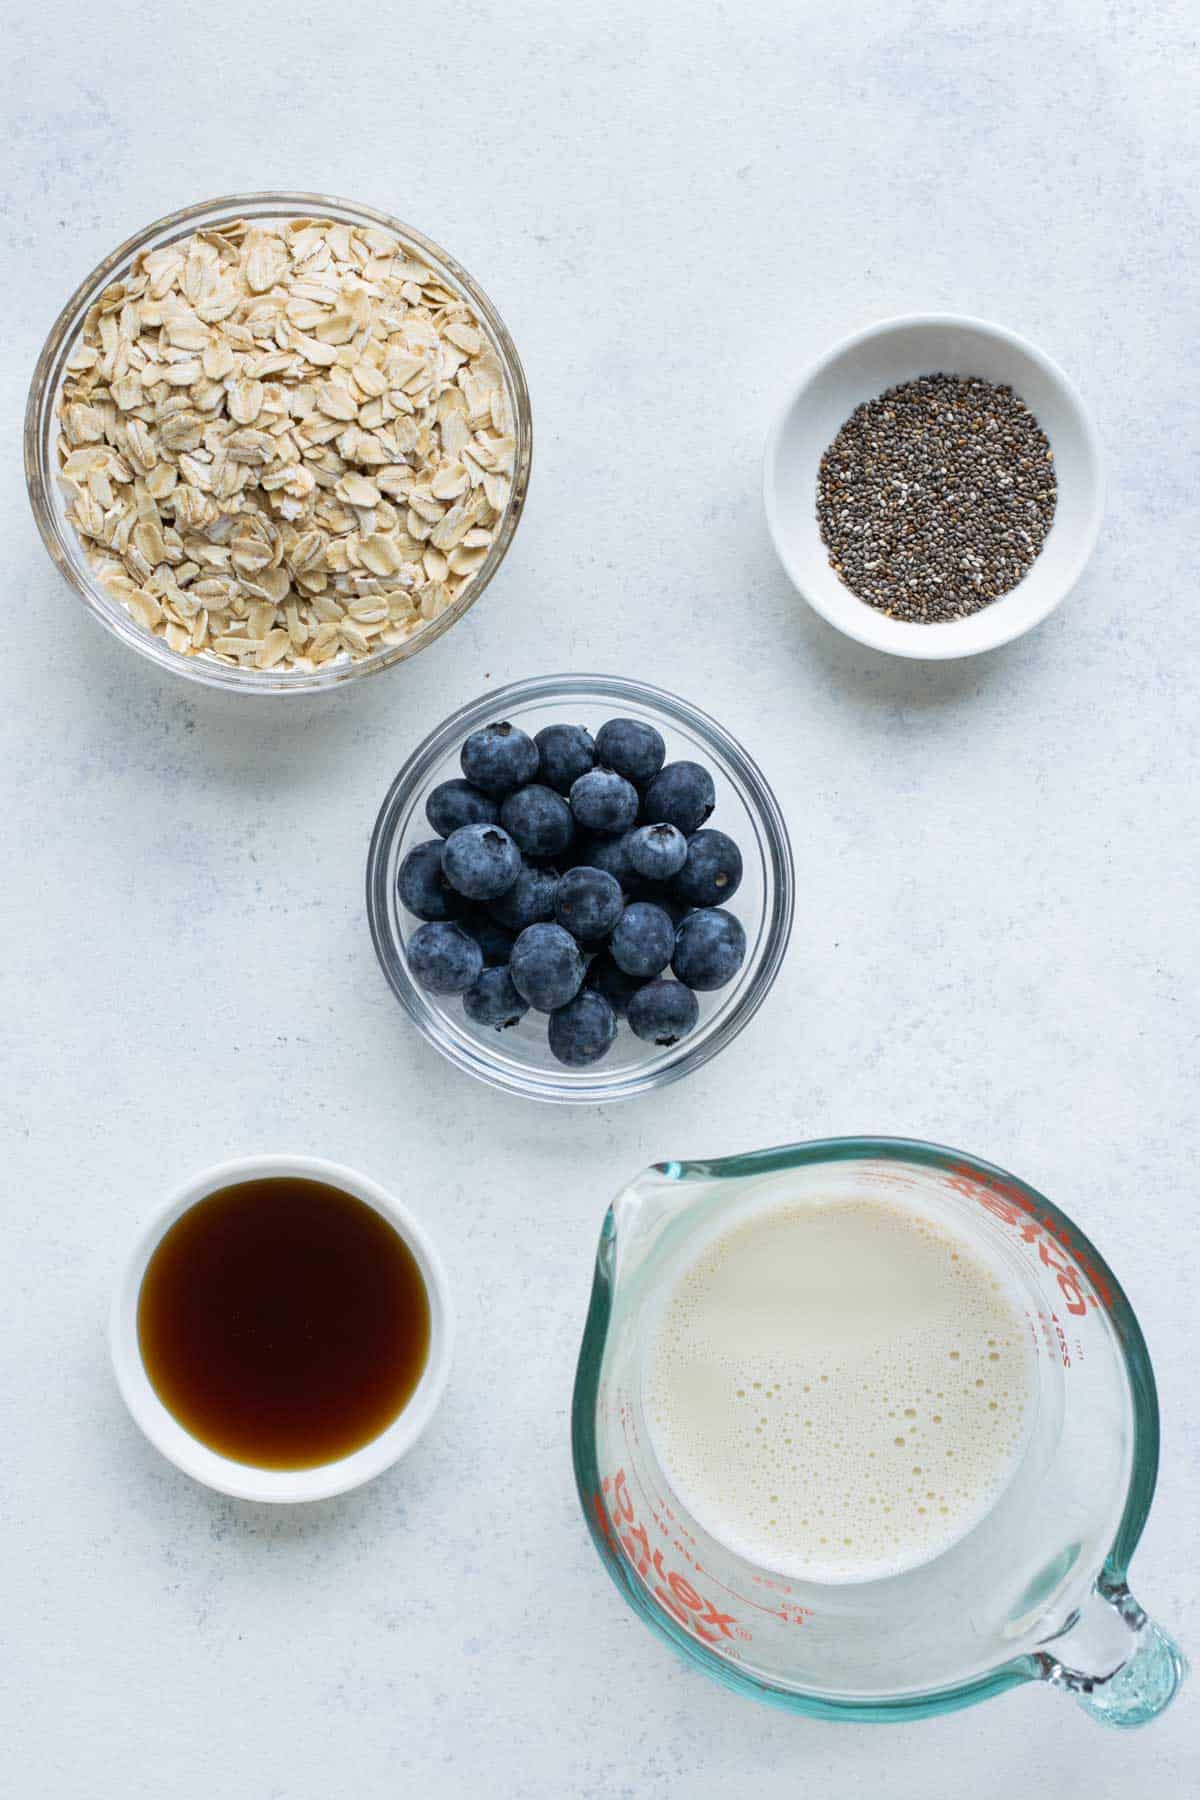 Rolled oats, blueberries, chia seeds, milk, and maple syrup are the ingredients for this recipe.